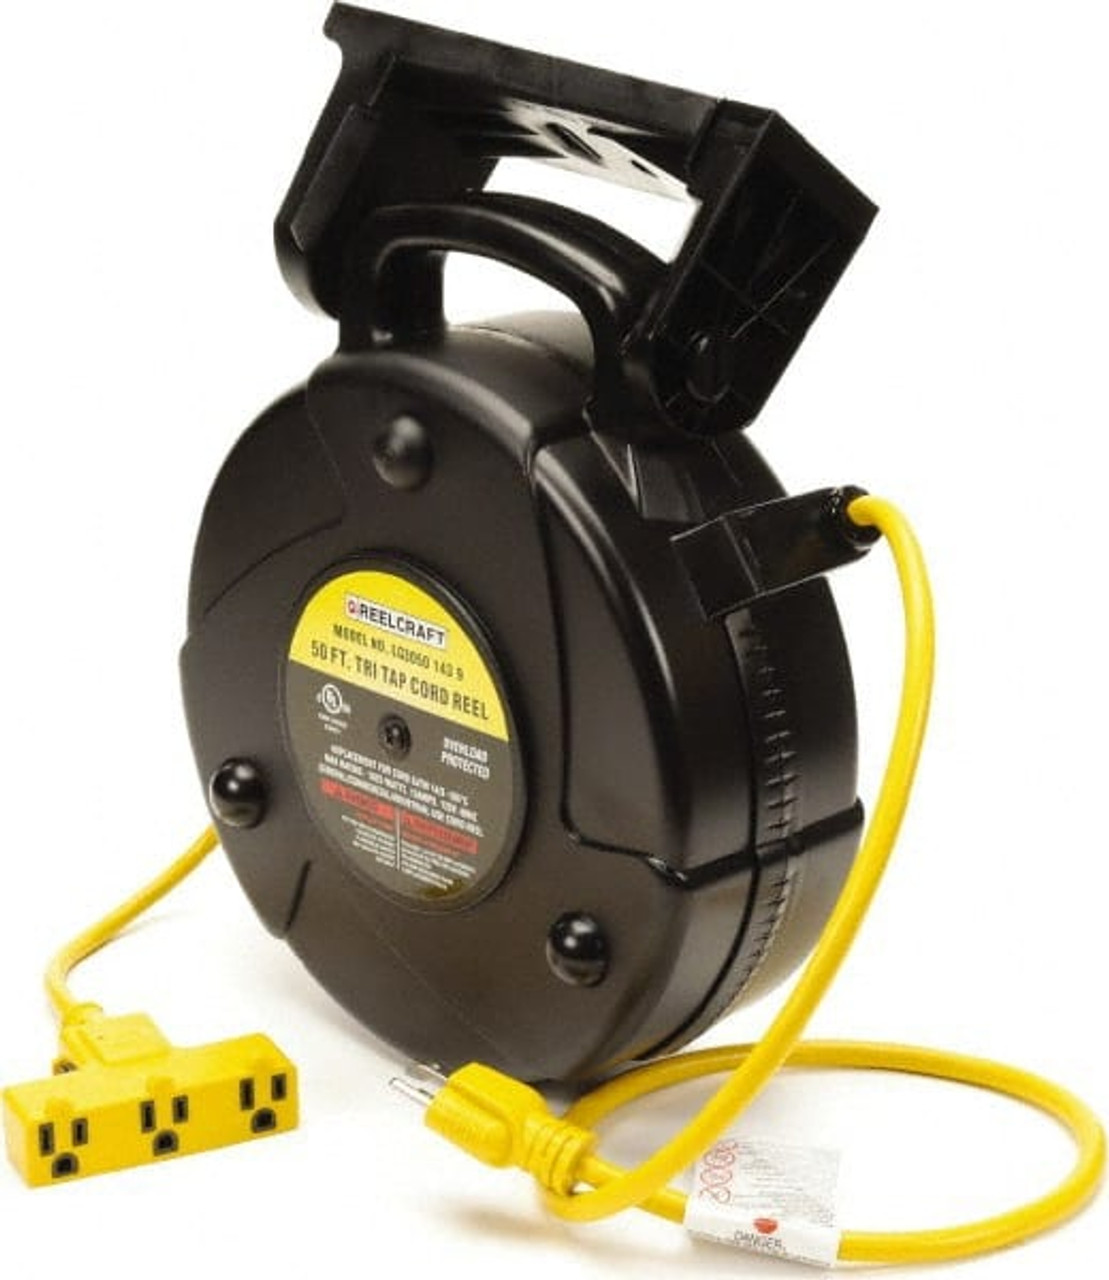 Reelcraft 14 AWG, 50 ft. Long Cord and Cable Reel with Outlet End Medium  Duty, 3 Outlets, 3 Conductors, 13 AMPs, 125 Volts, SJTW Yellow Cable, Black  Reel LG3050 143 9 - 02442853 - Penn Tool Co., Inc